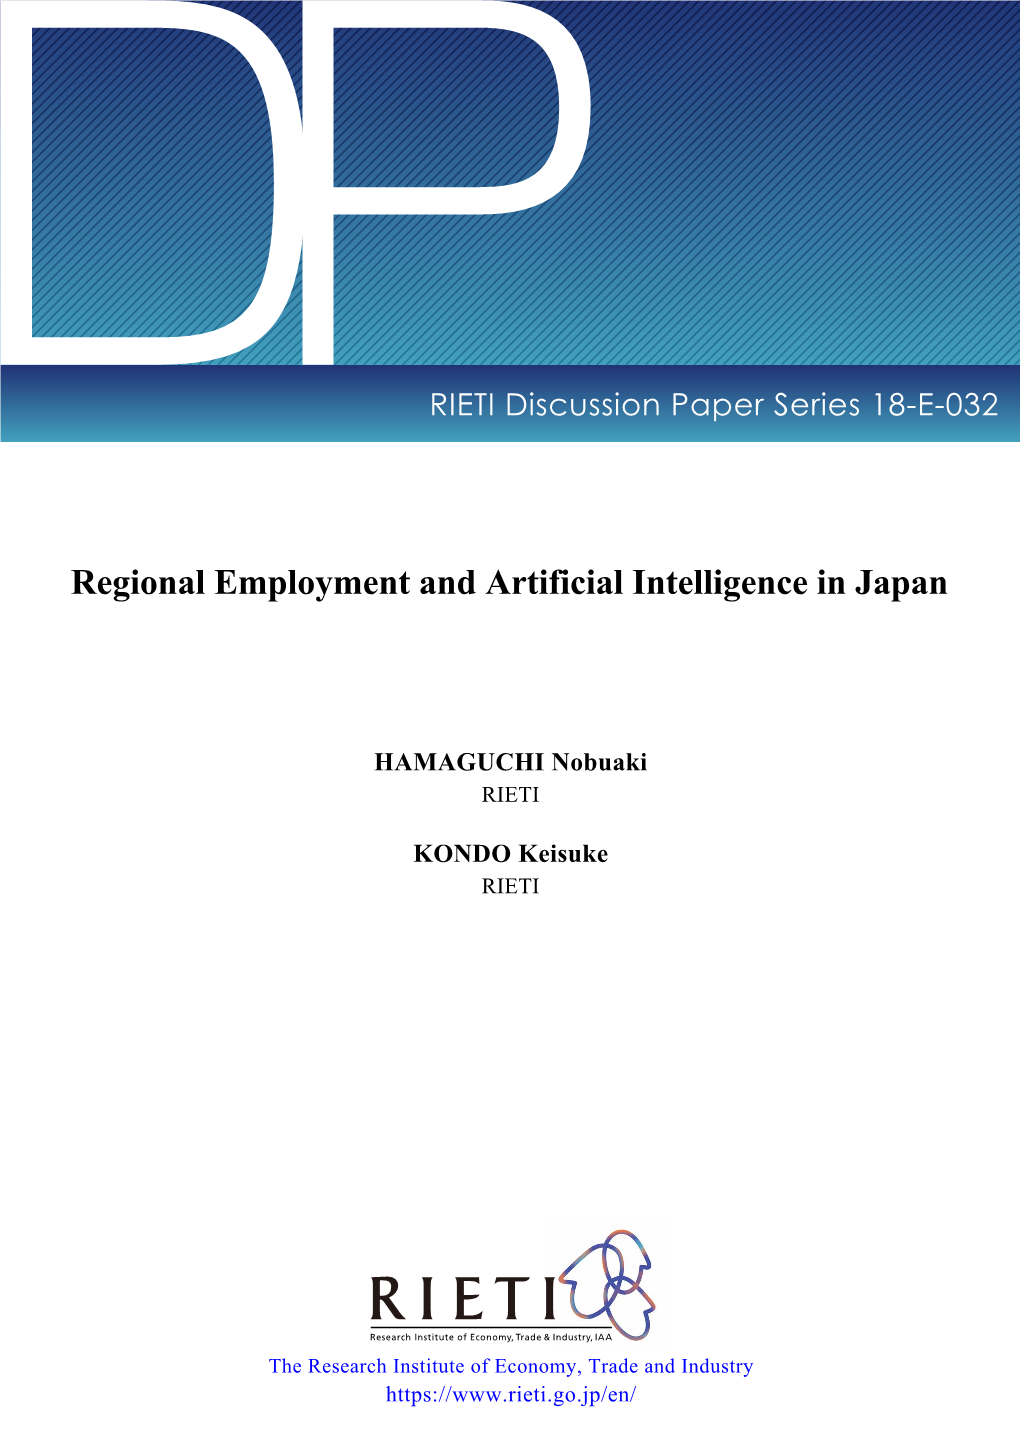 Regional Employment and Artificial Intelligence in Japan